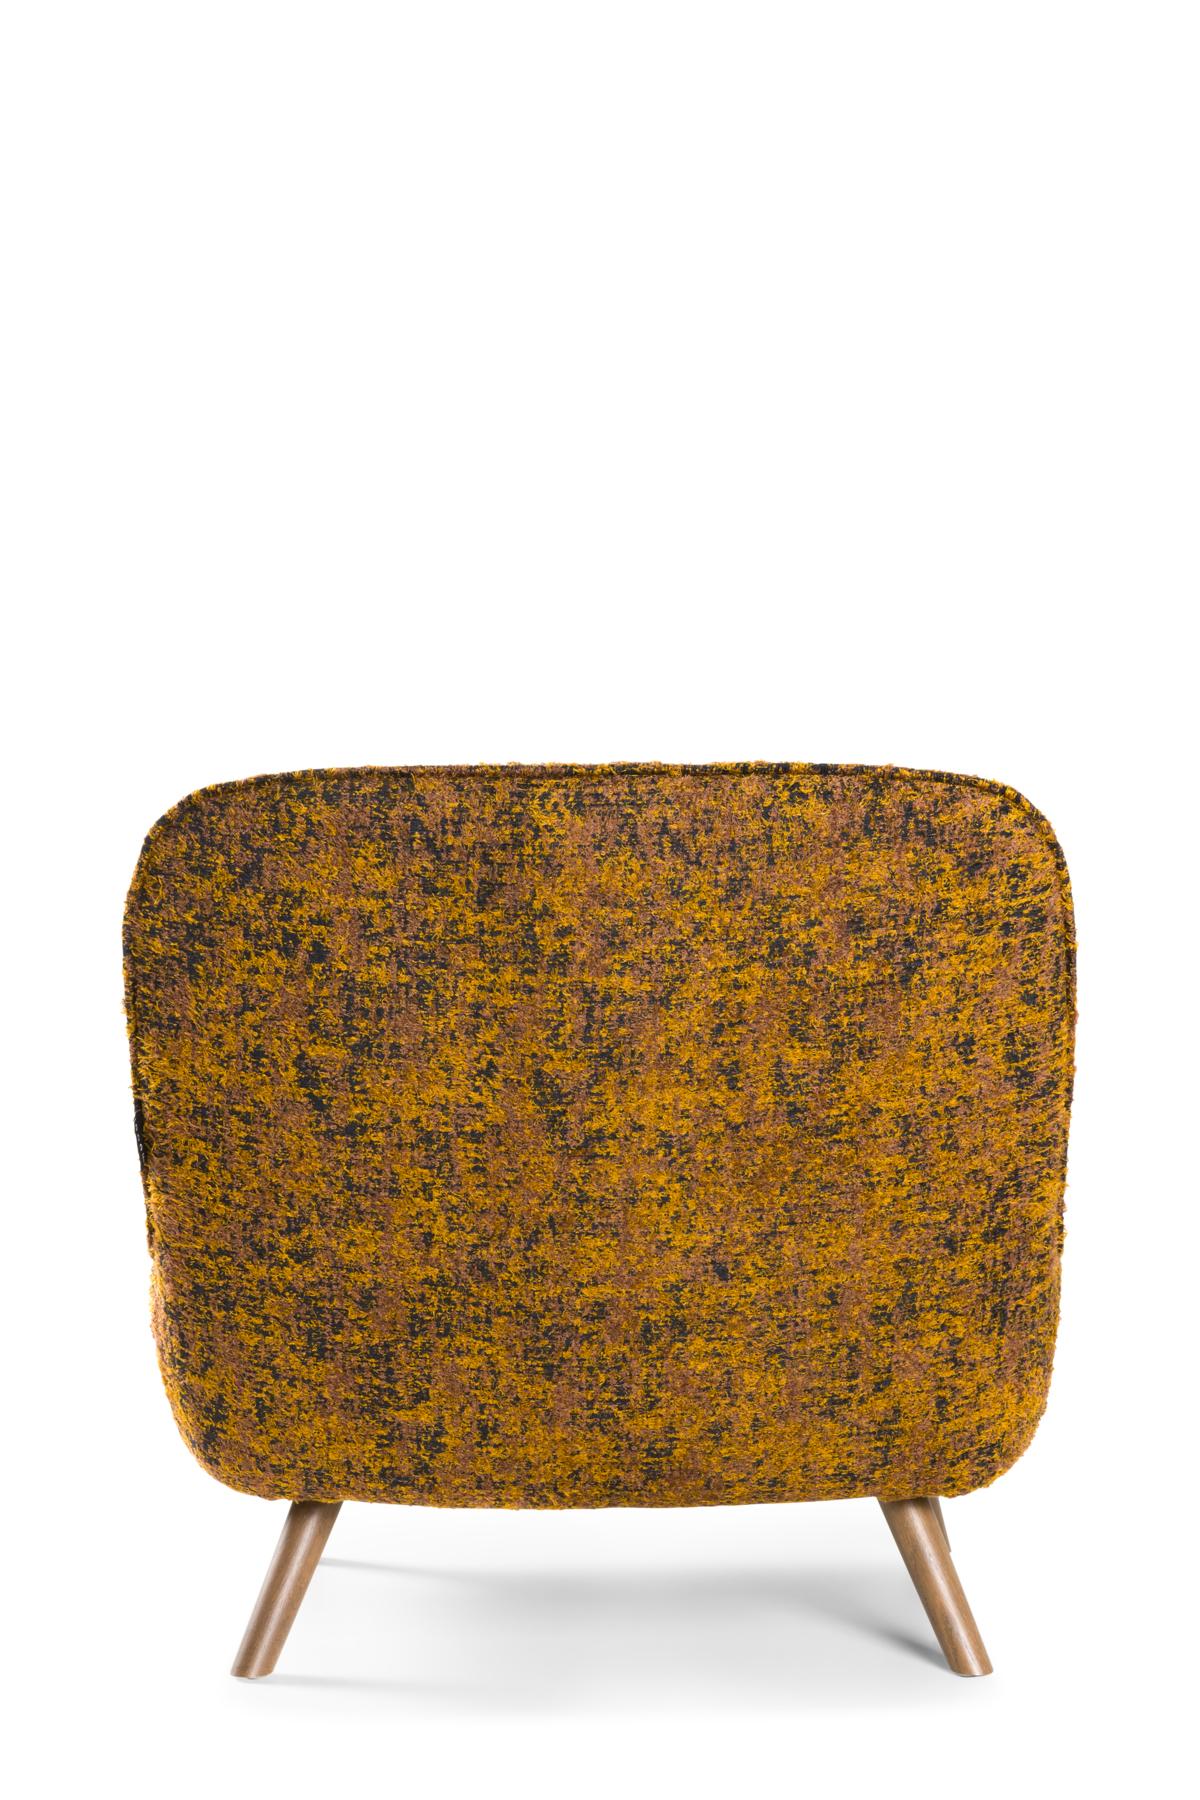 Modern Moooi Cocktail Chair in Jacquard Mustard Upholstery with White Wash Stained Legs